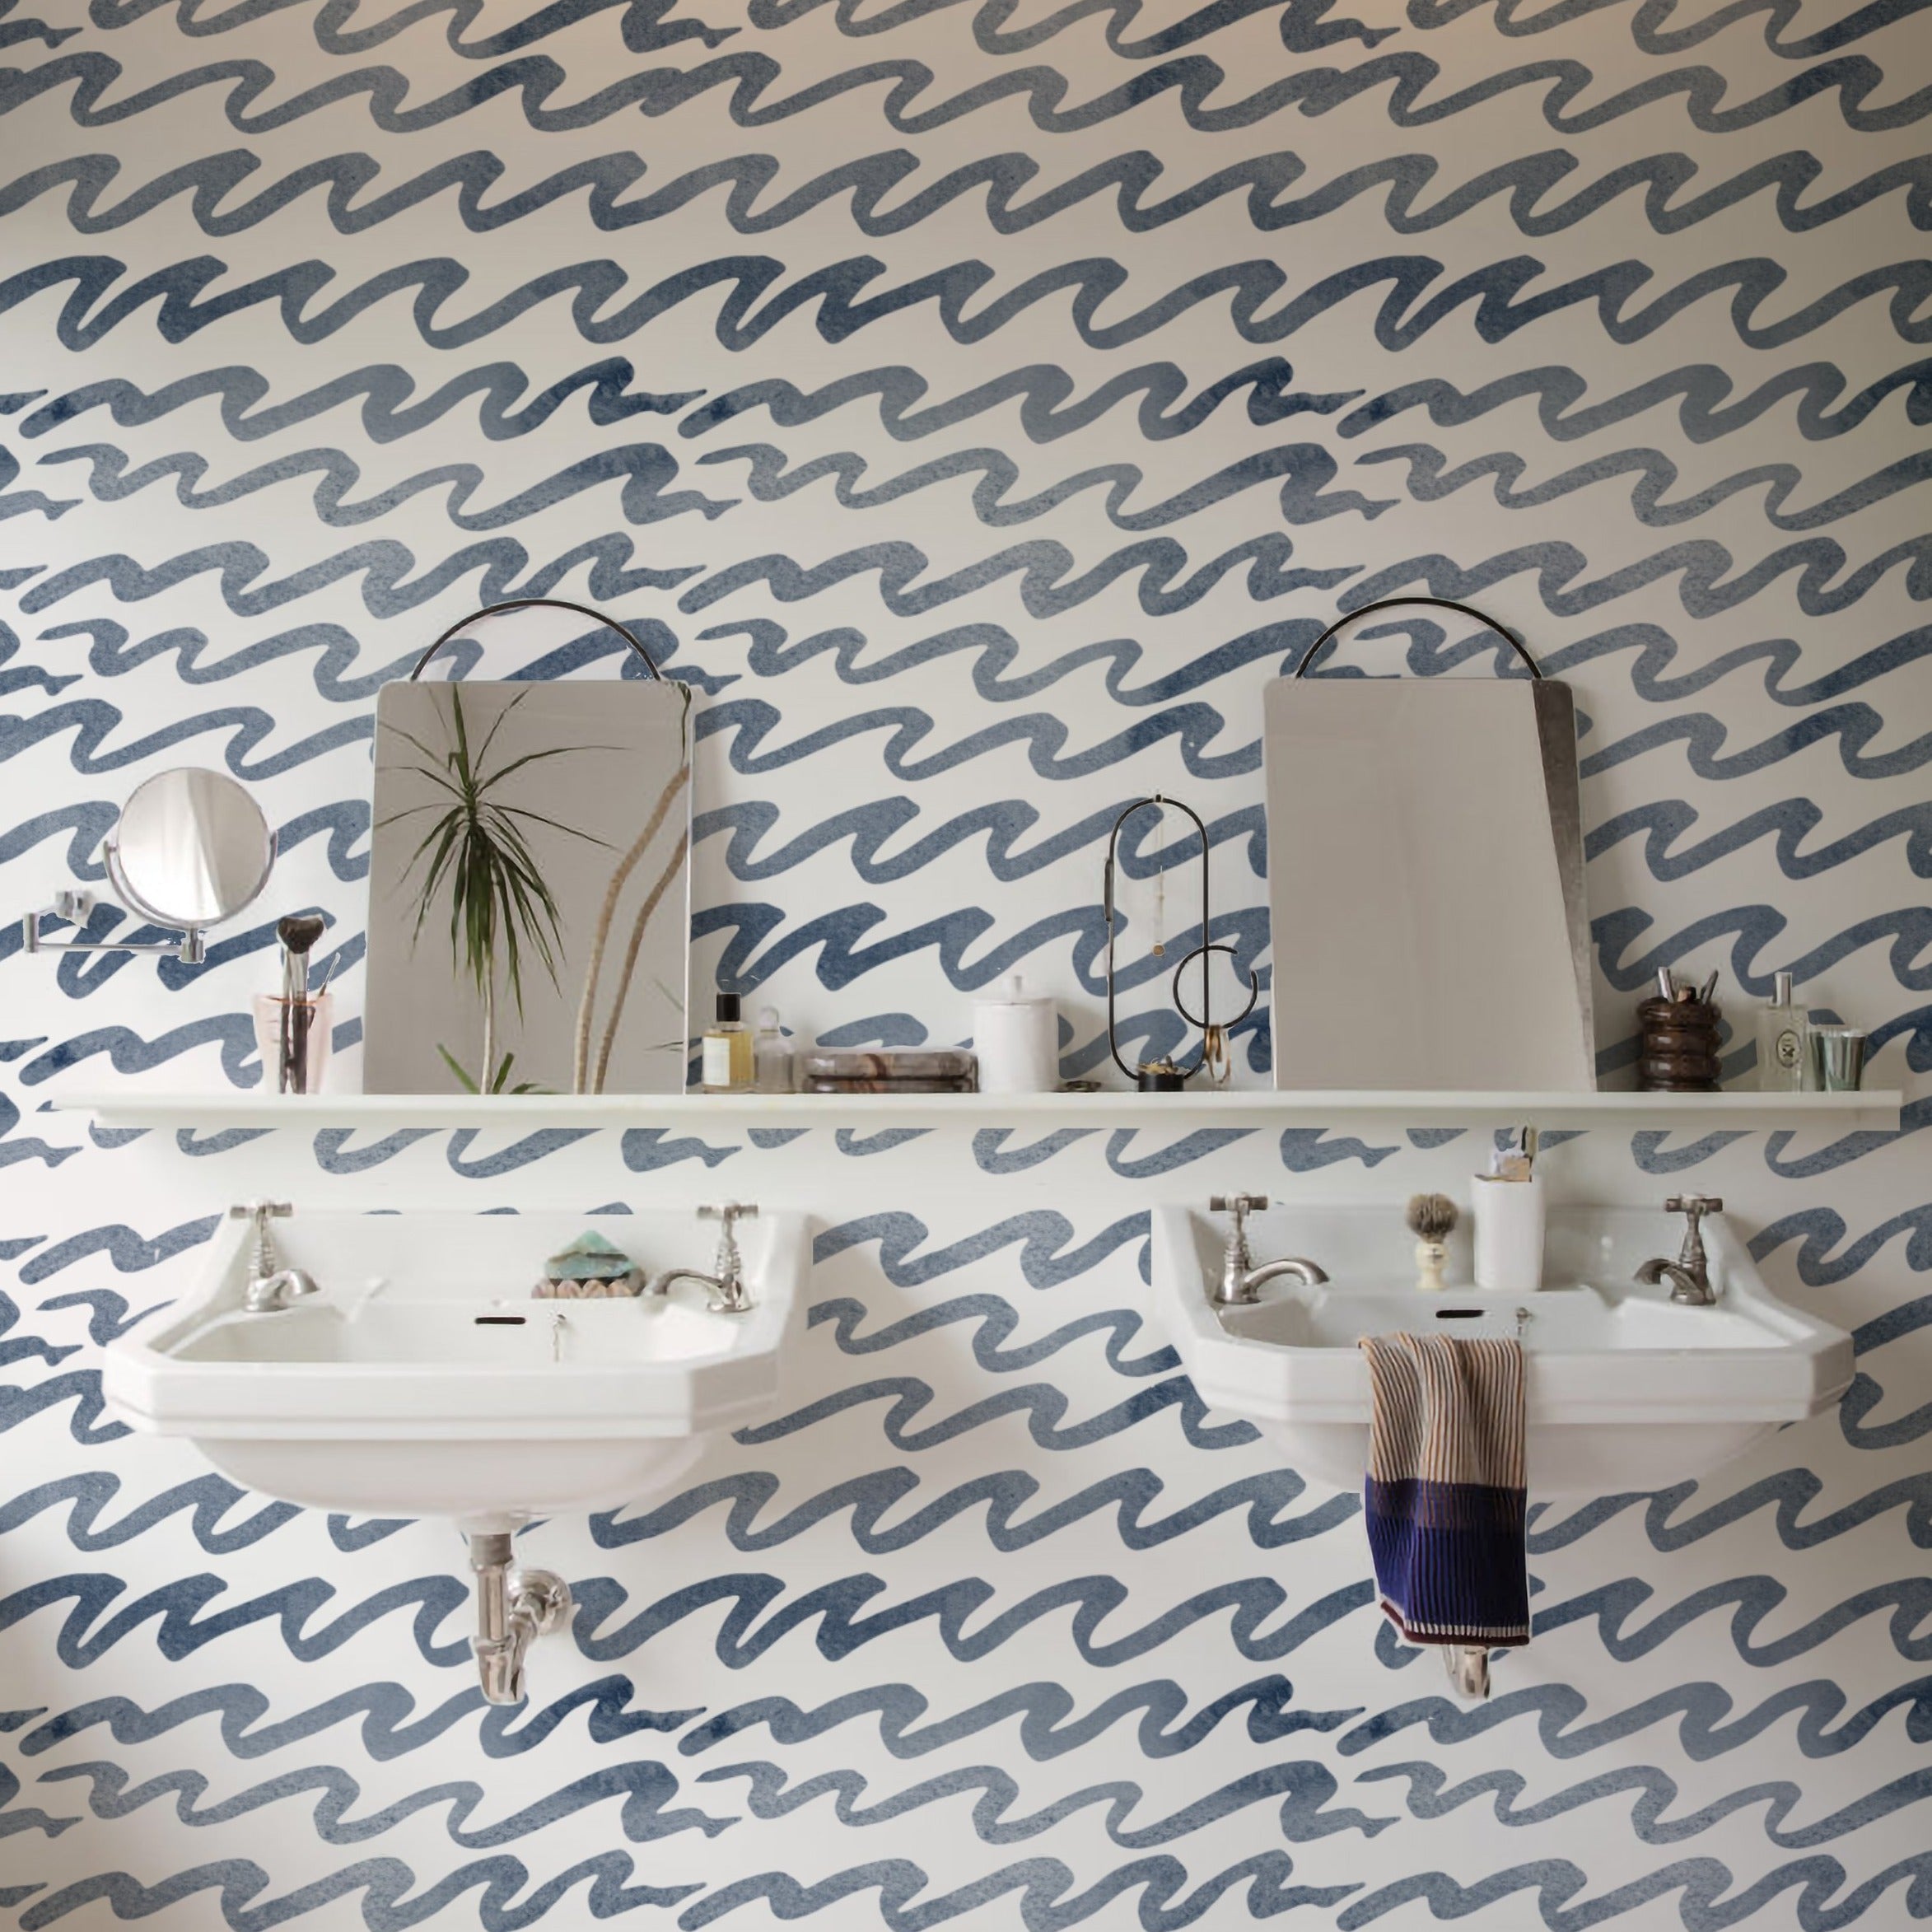 Contemporary bathroom decorated with Wave Wallpaper - Navy Wallpaper, showcasing navy blue wave patterns on a white background, adding a bold and stylish touch to the space